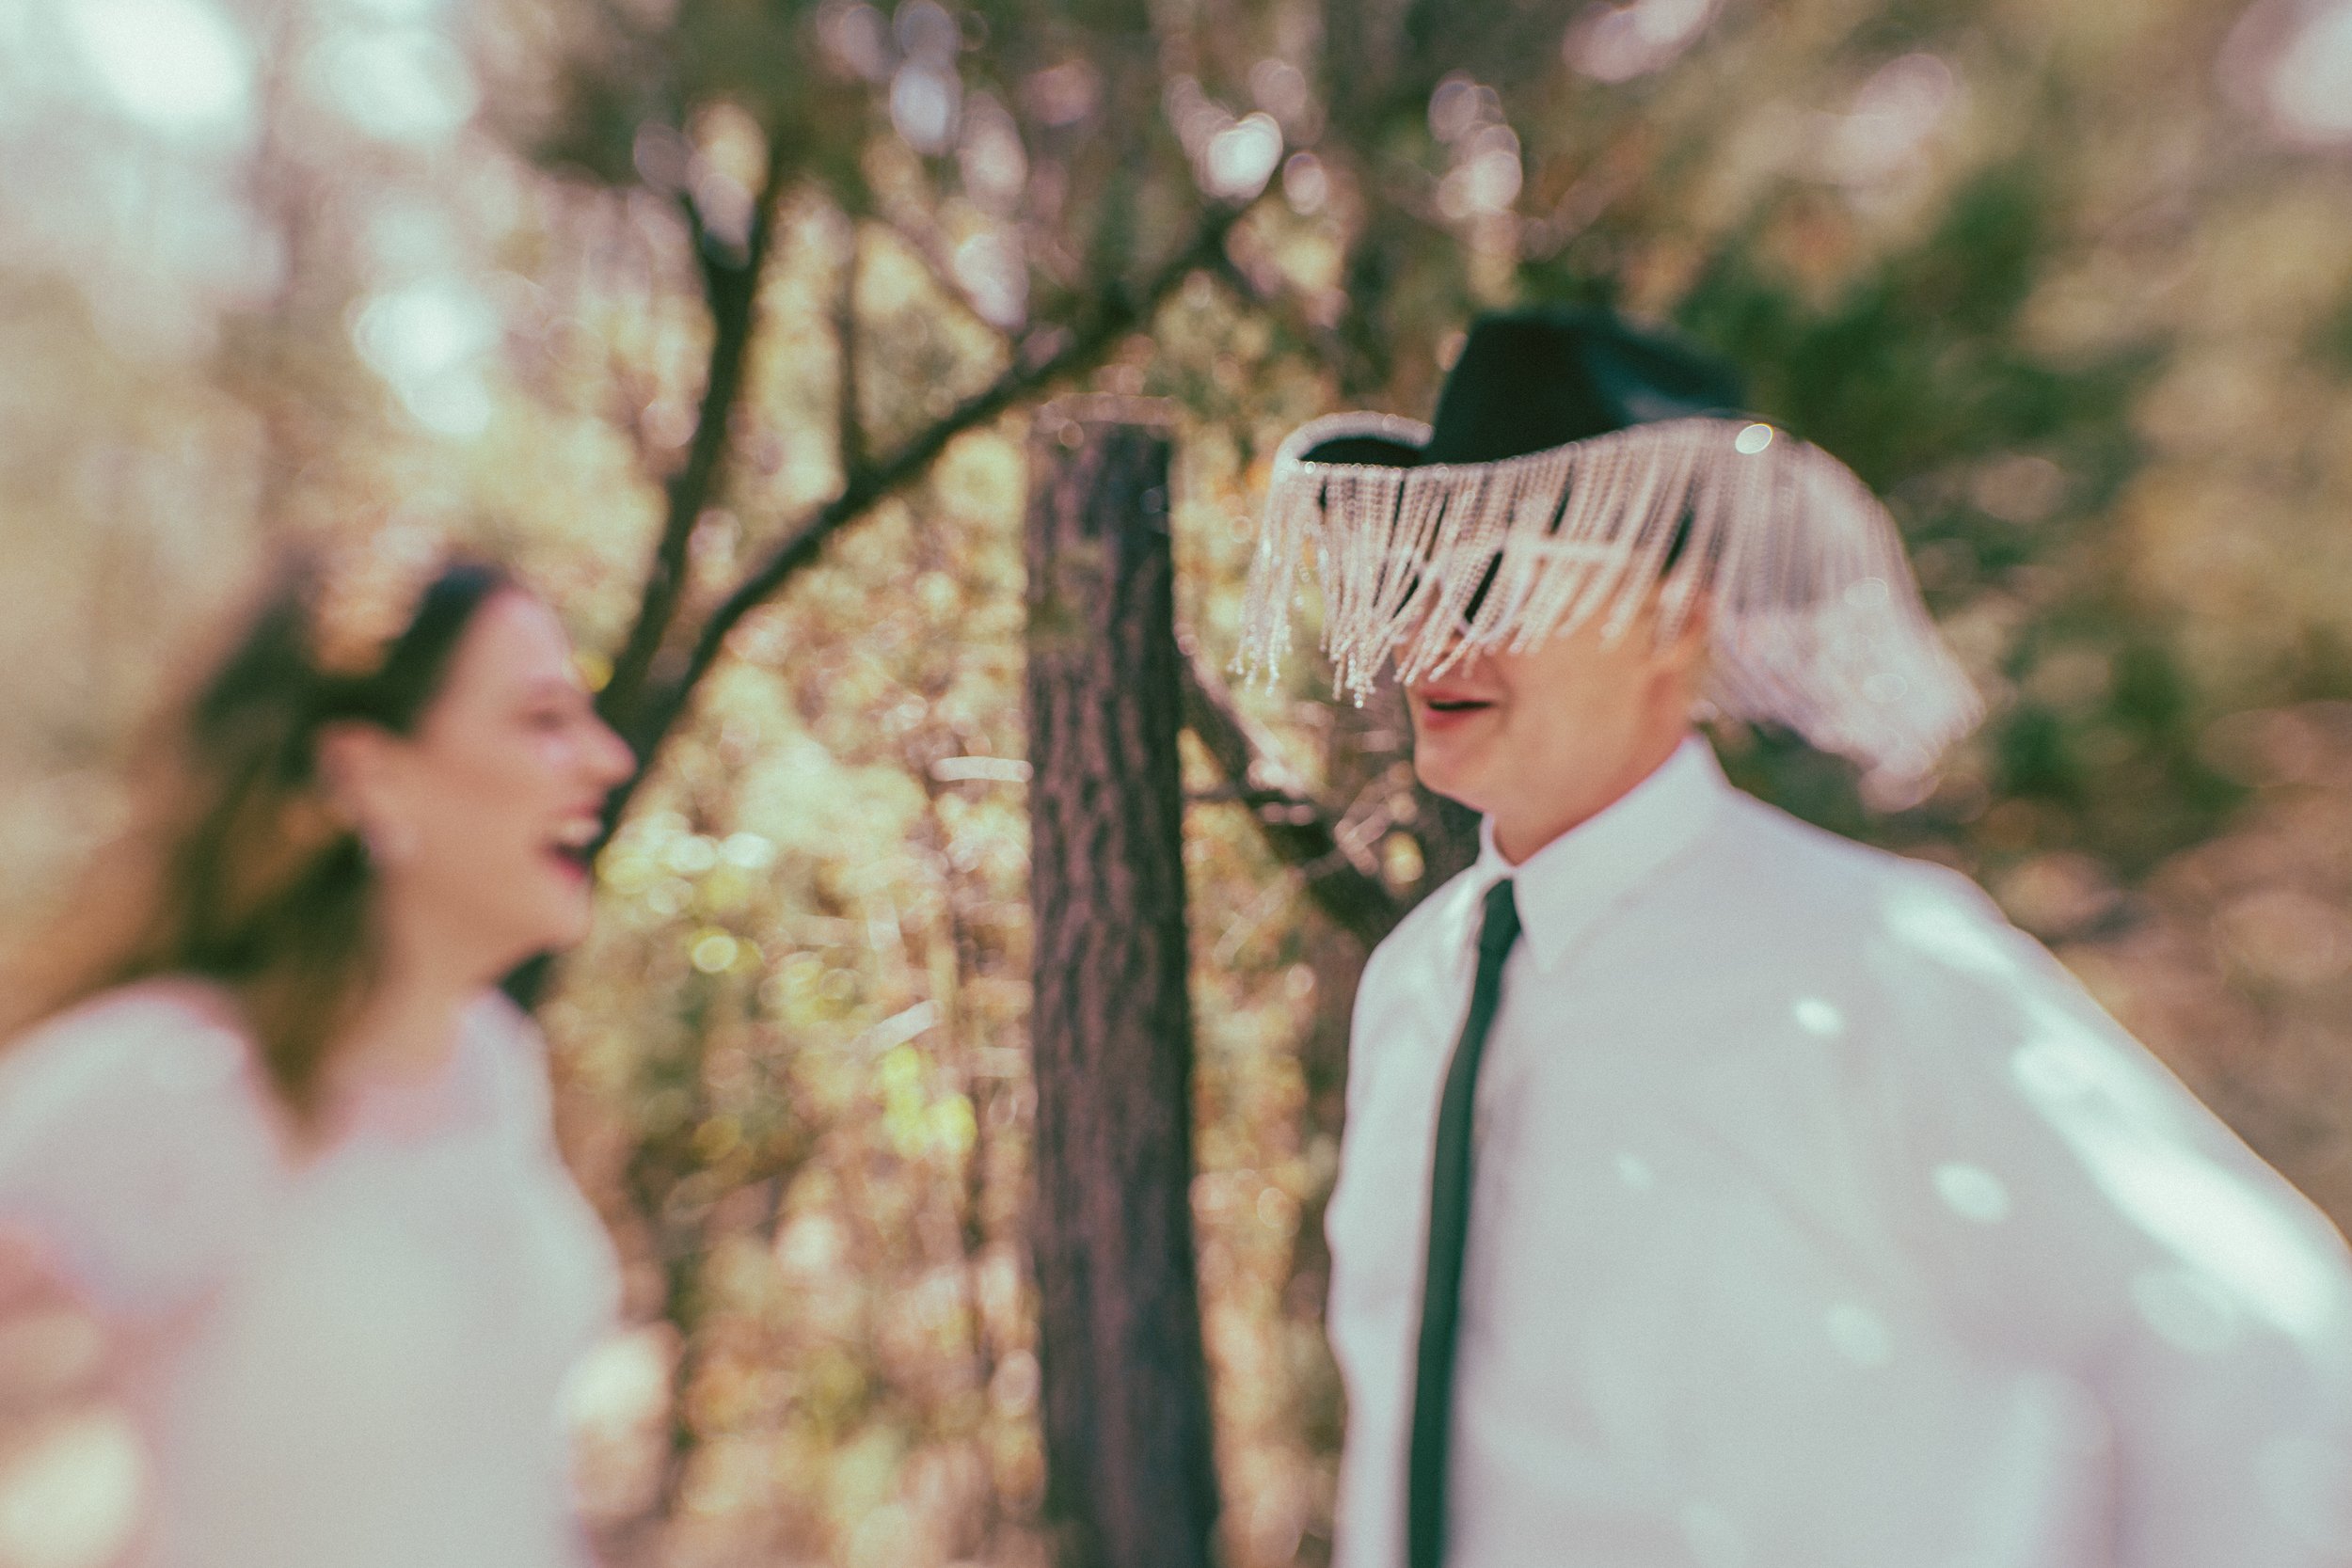 Newlyweds at their elopement reception in the Tonto National Forest in Payson, AZ by the best Arizona Elopement Photographer; Jennifer Lind Schutsky.